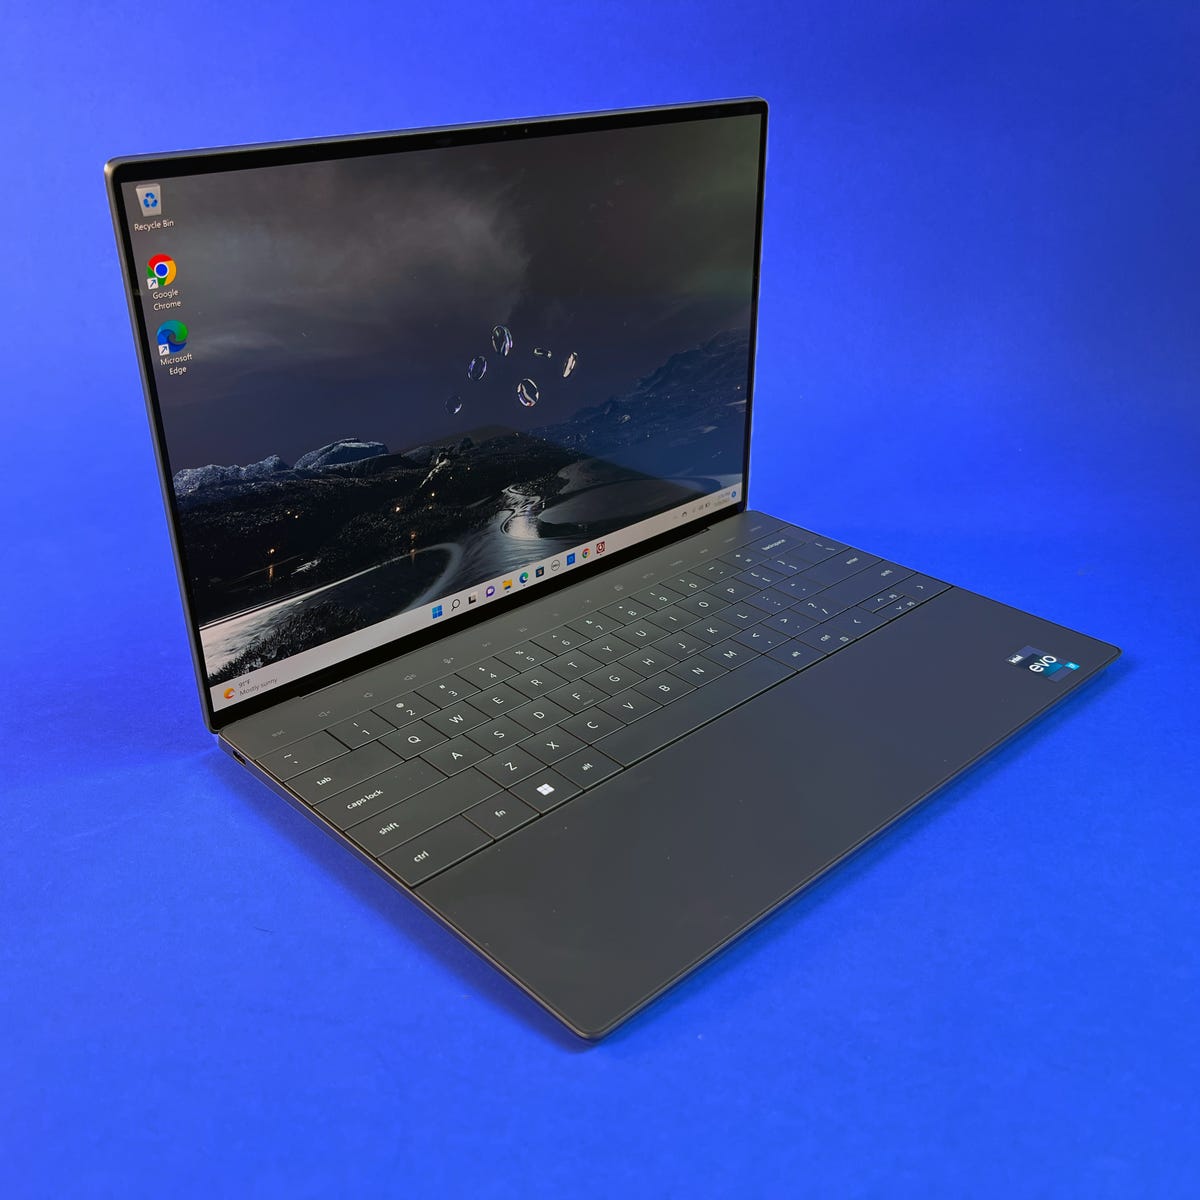 Dell XPS 13 Plus Review: This Slim Premium Laptop Isn't Afraid to Shake  Things Up - CNET